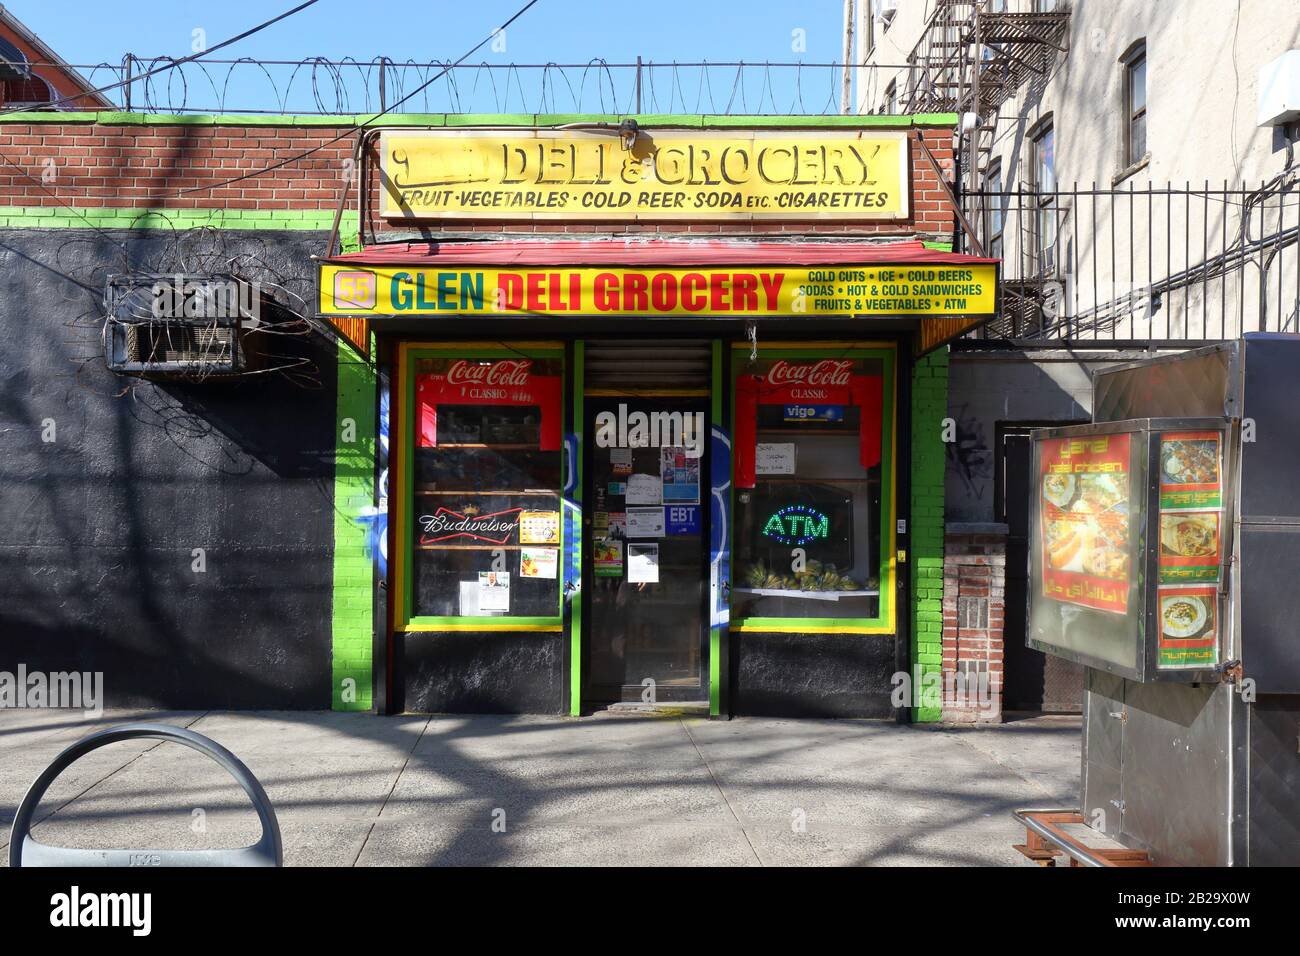 Glen Deli & Grocery, 55 Hegeman Ave, Brooklyn, New York. NYC storefront photo of a bodega in Brownsville. Stock Photo